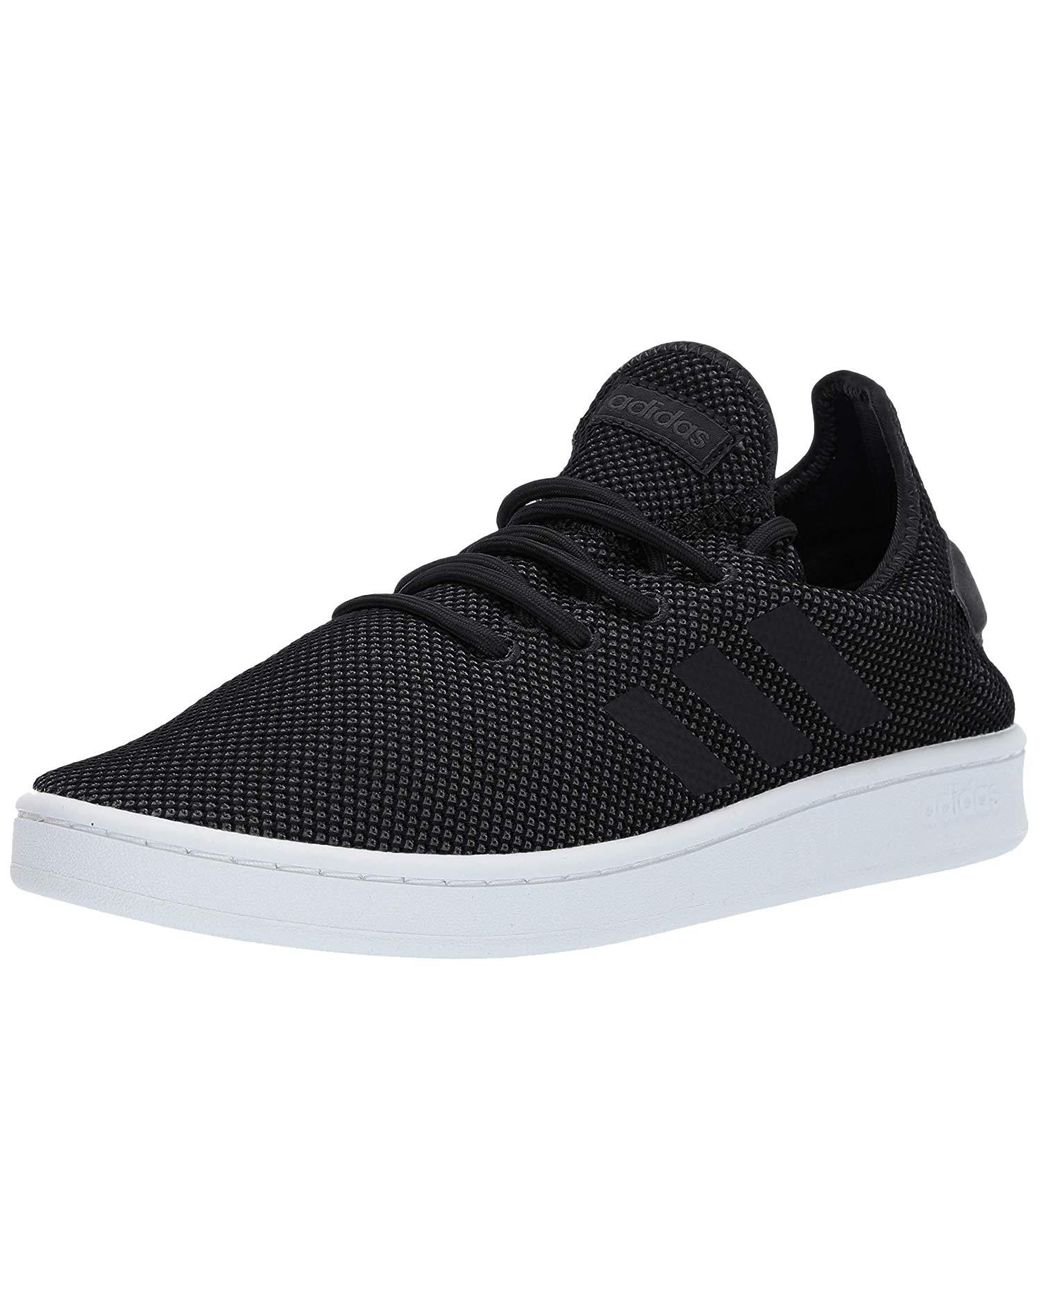 adidas Rubber Court Adapt Shoes in Black/Black/White (Black) for Men - Save  72% | Lyst